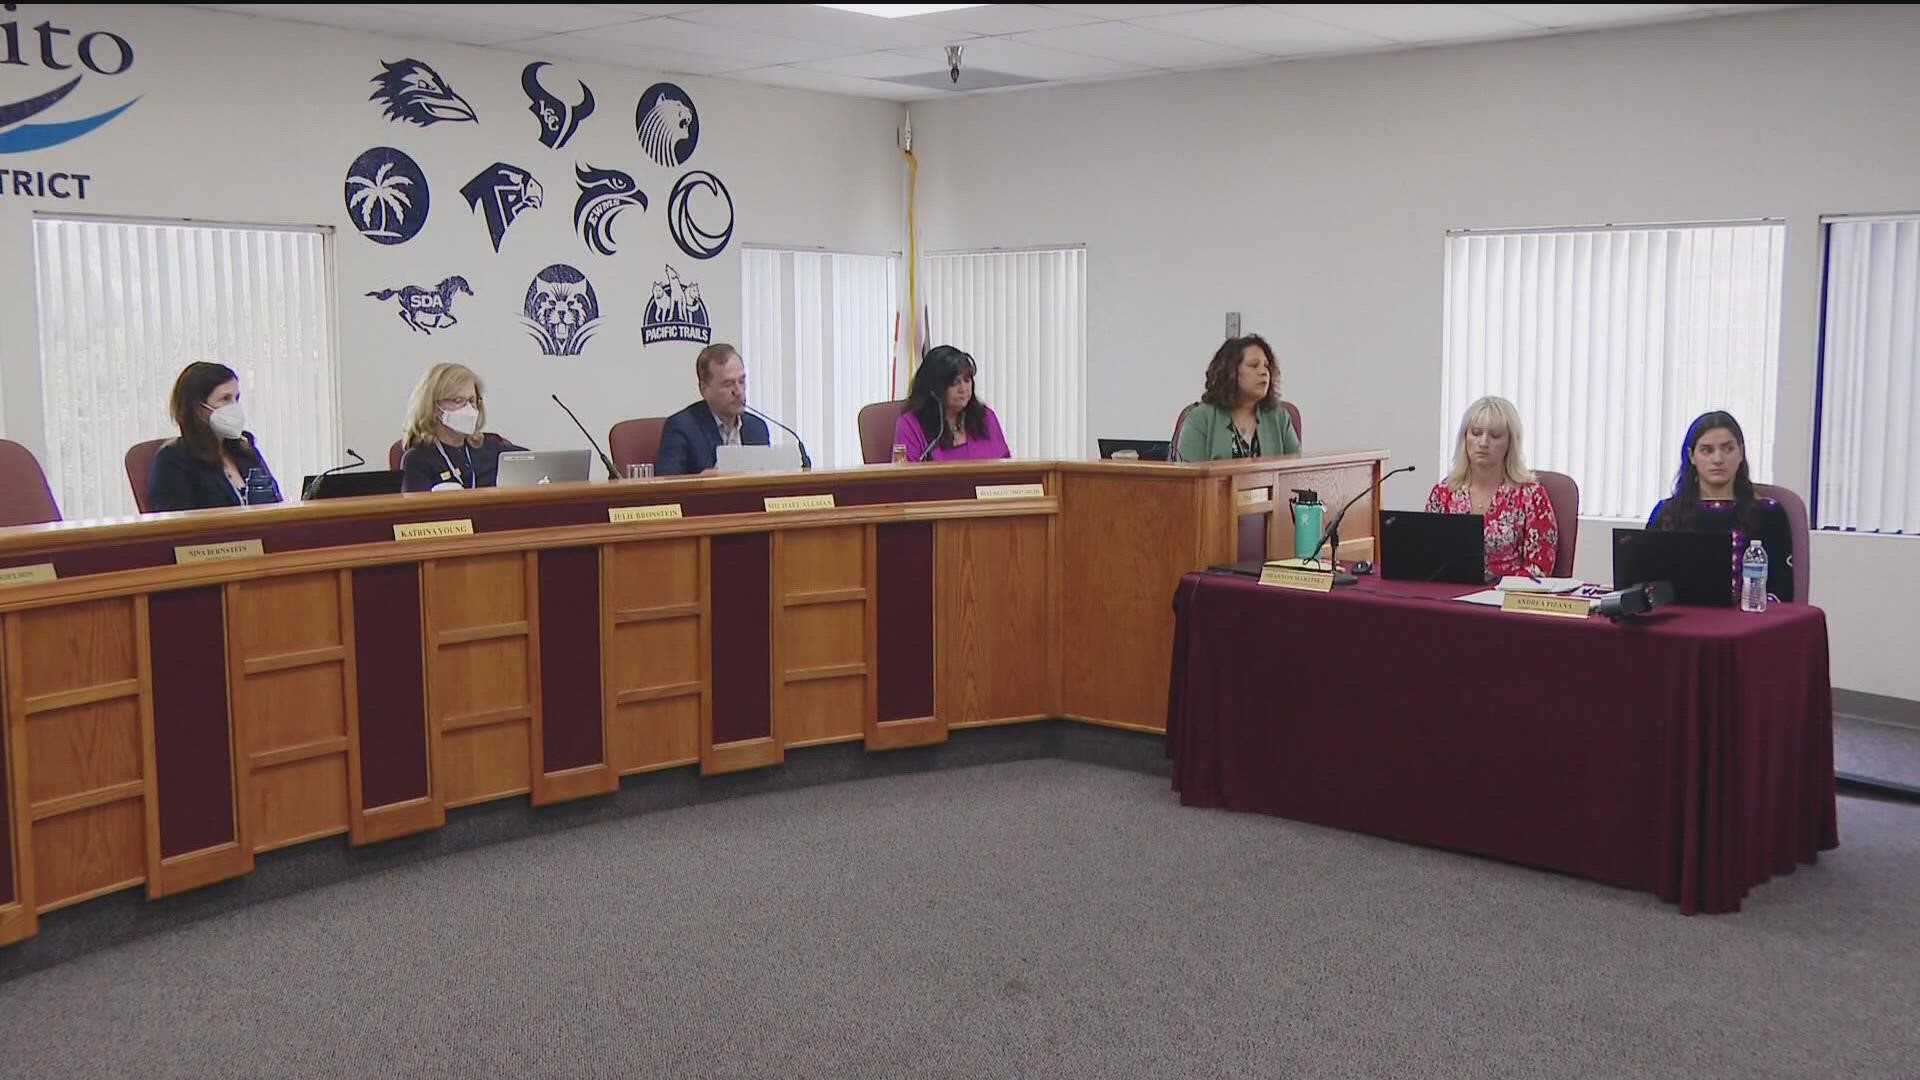 The San Dieguito Union High School District heard passionate statements from parents and students during its board meeting on Thursday.